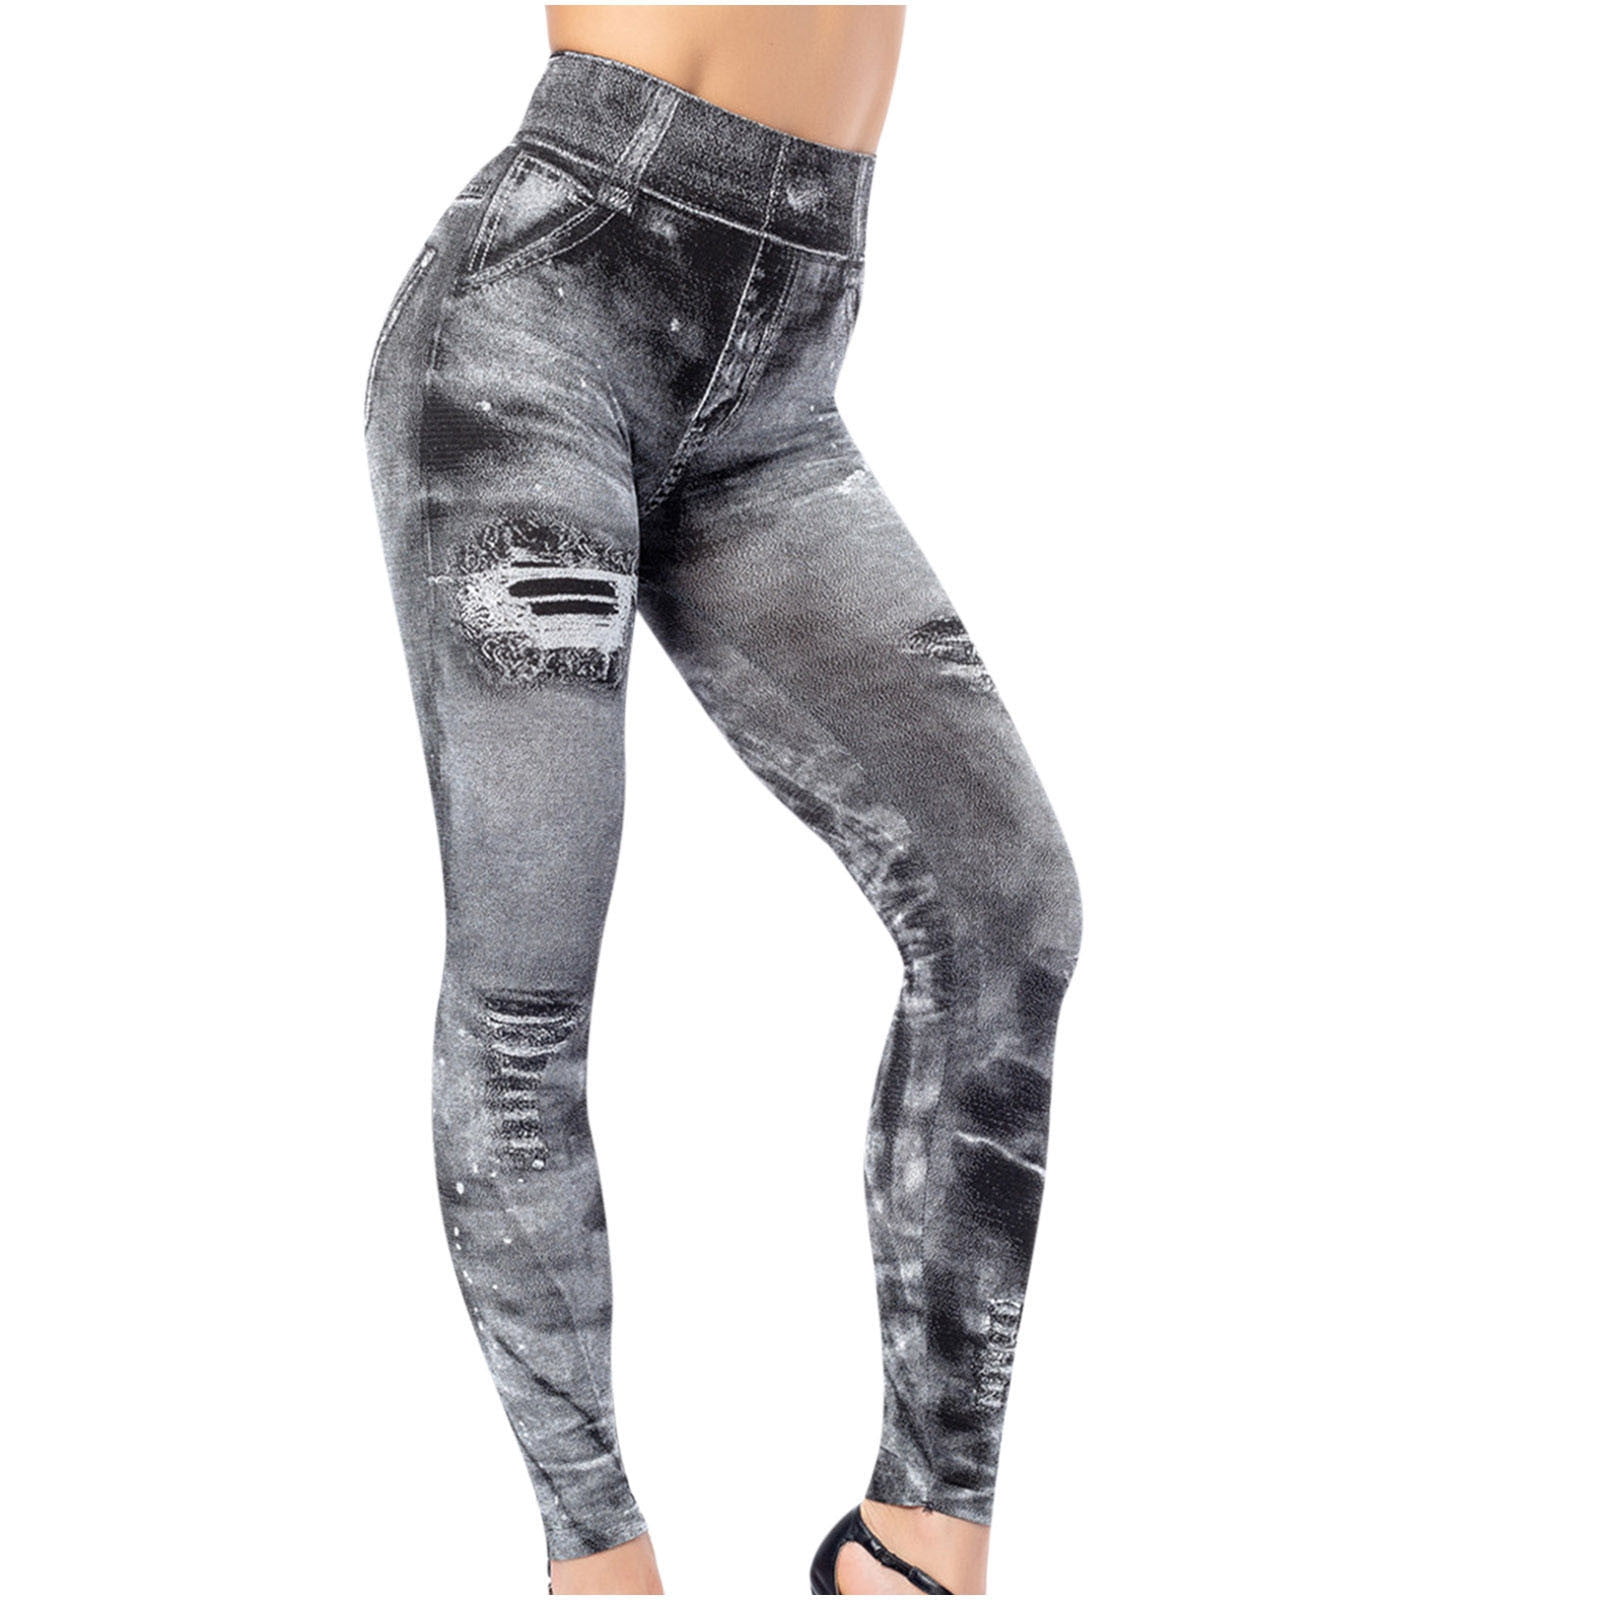 SELONE Jeggings for Women Casual Butt Lifting Jean Yogalicious